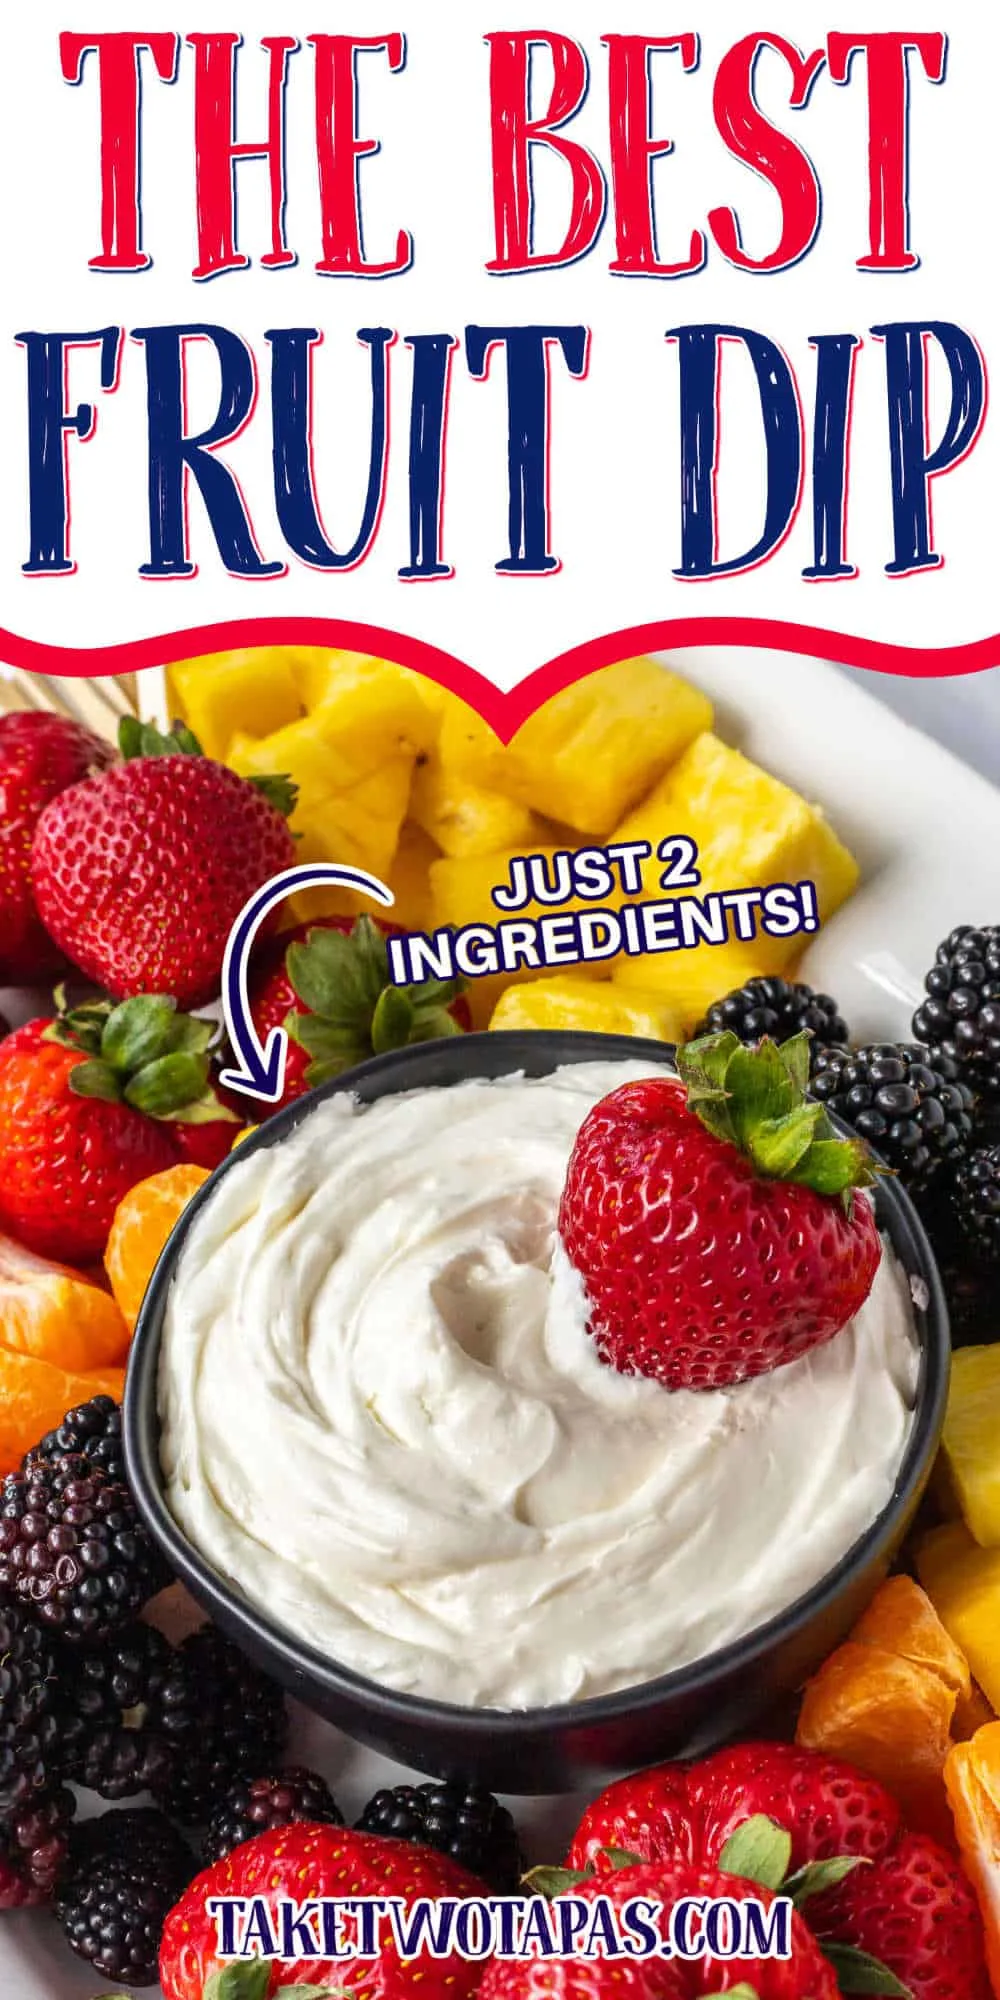 bowl of dip and strawberry with text "the best fruit dip"